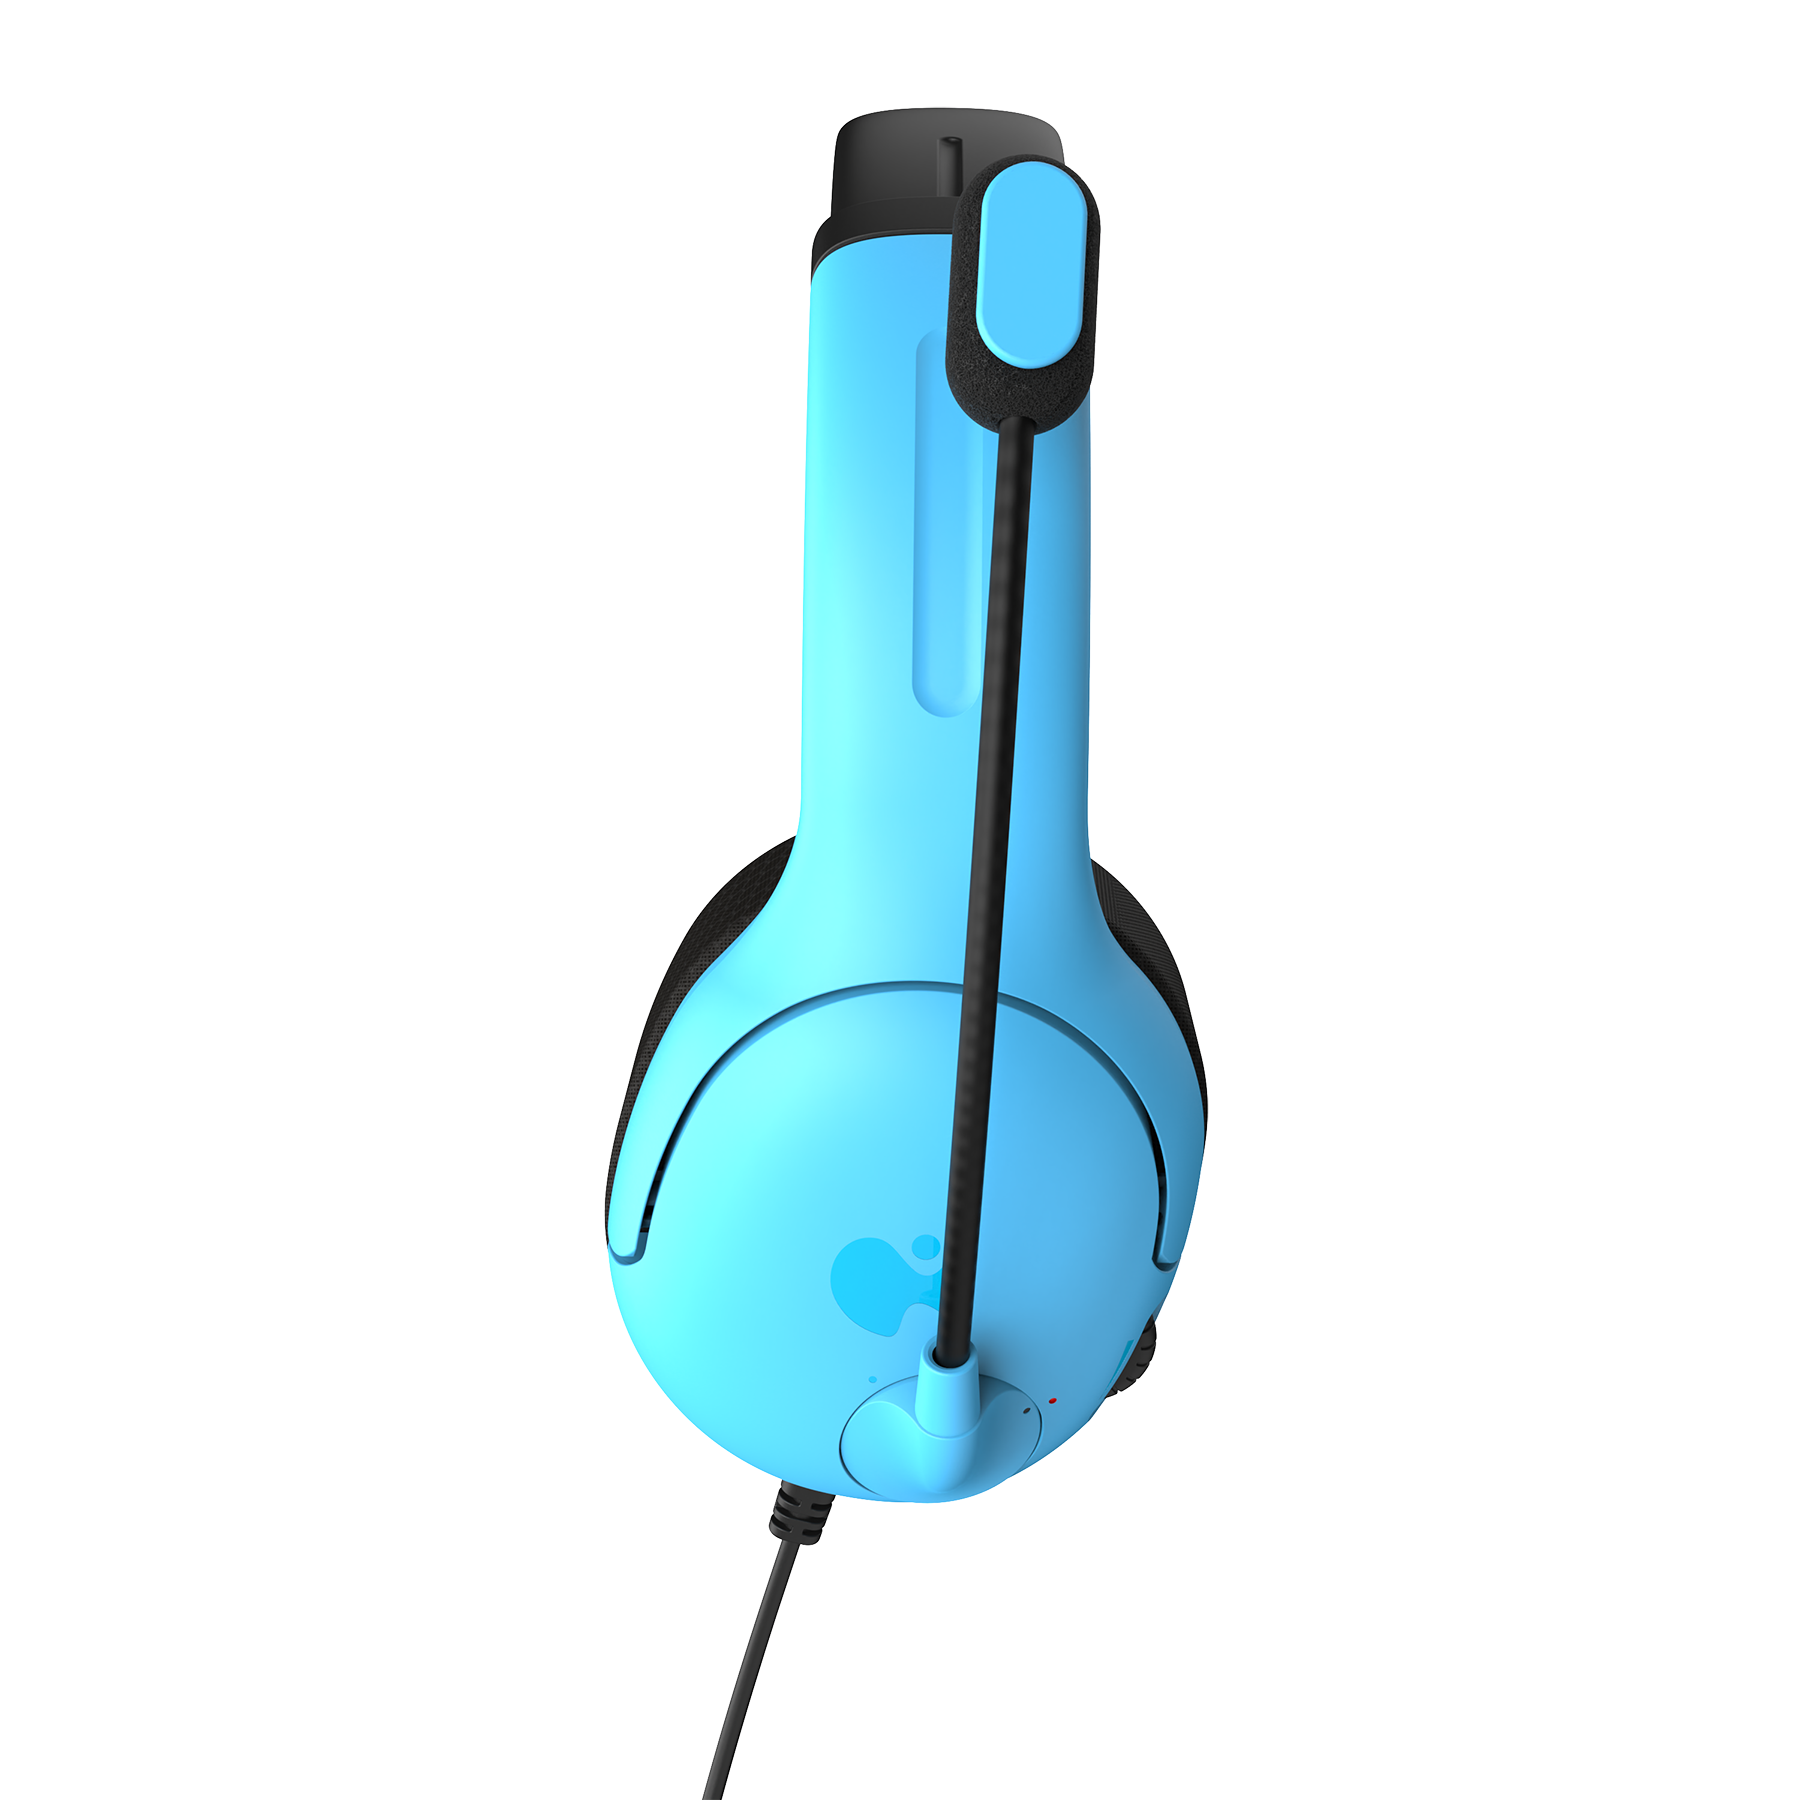 PDP Lvl40 Wired Headset for Nintendo Switch - Blue/Green